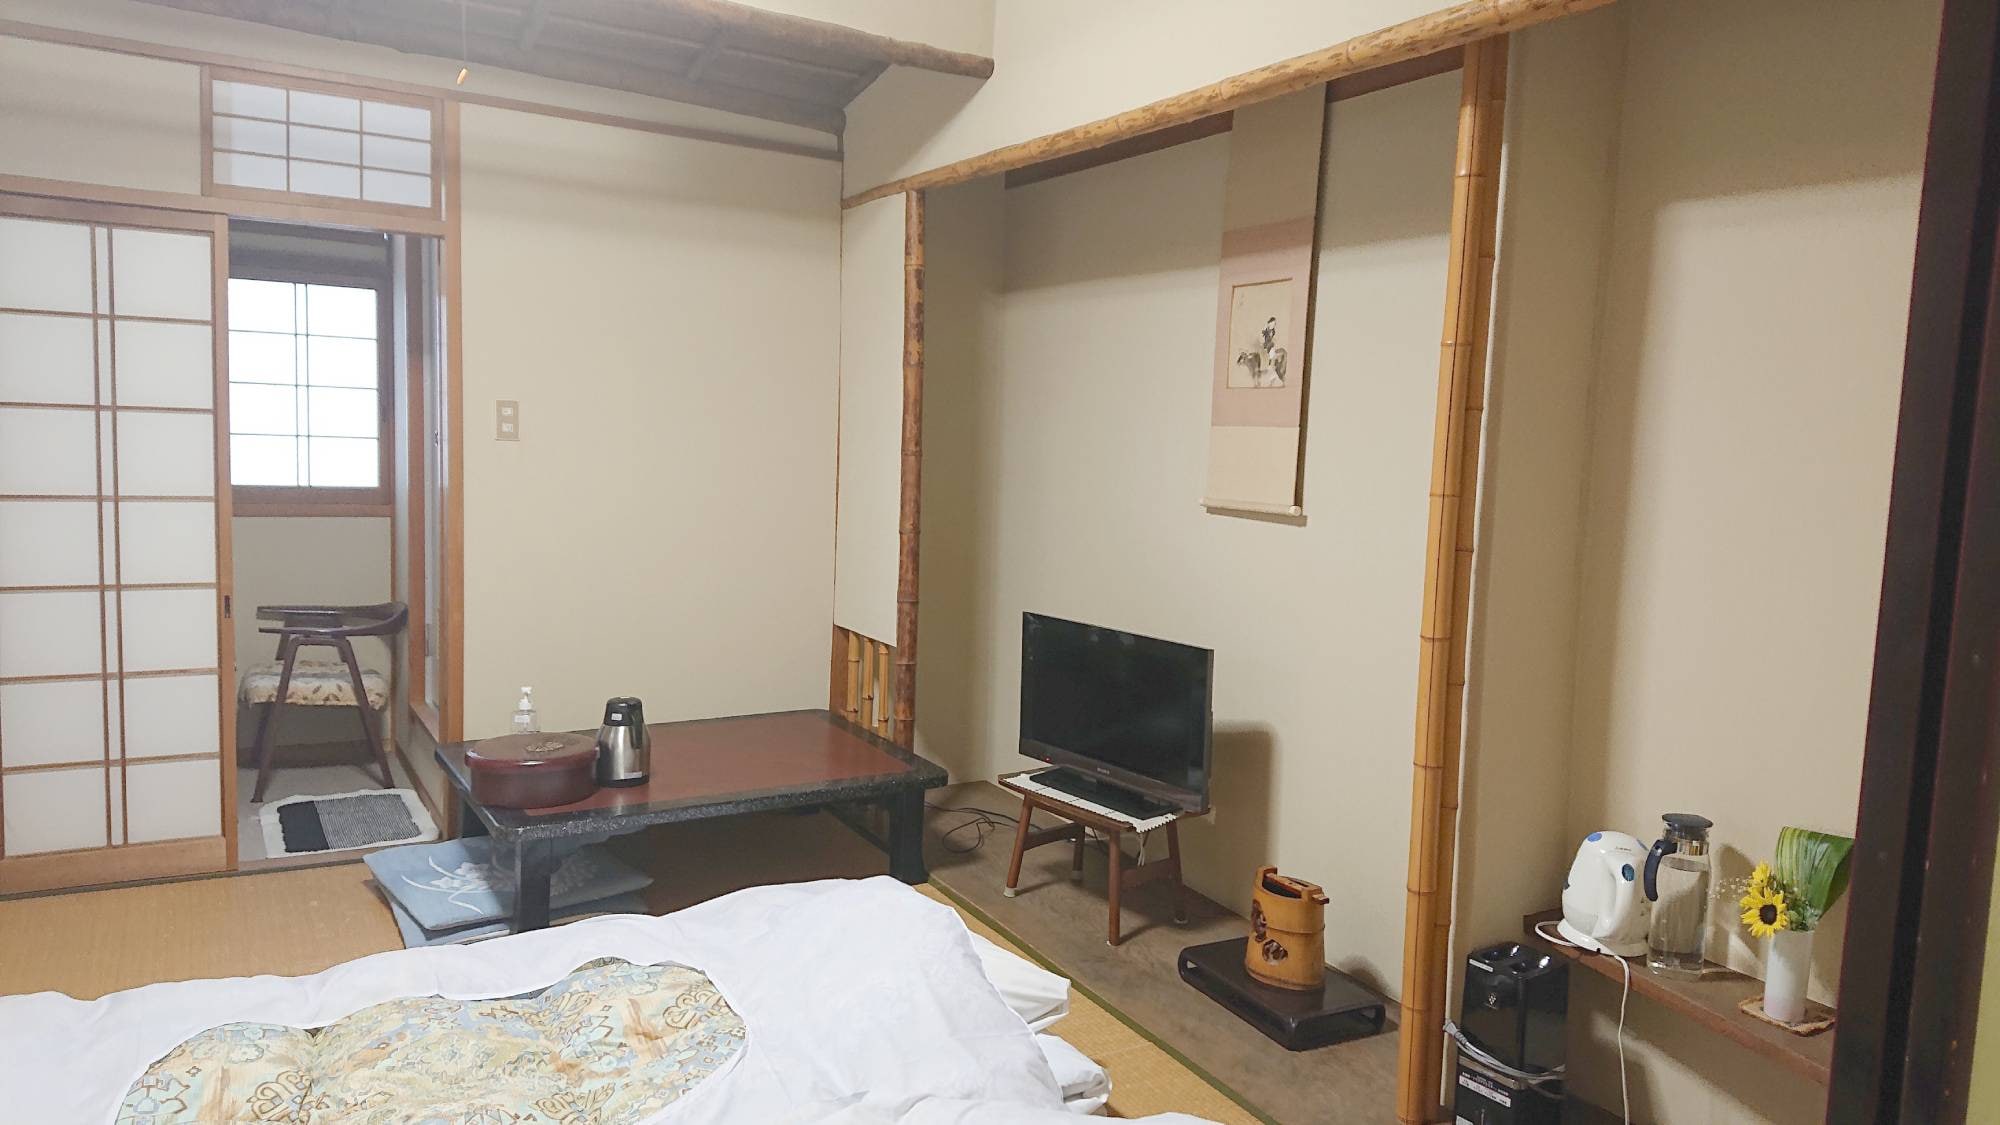 ・ Non-smoking Japanese-style room 6 tatami mats (with bath and toilet)